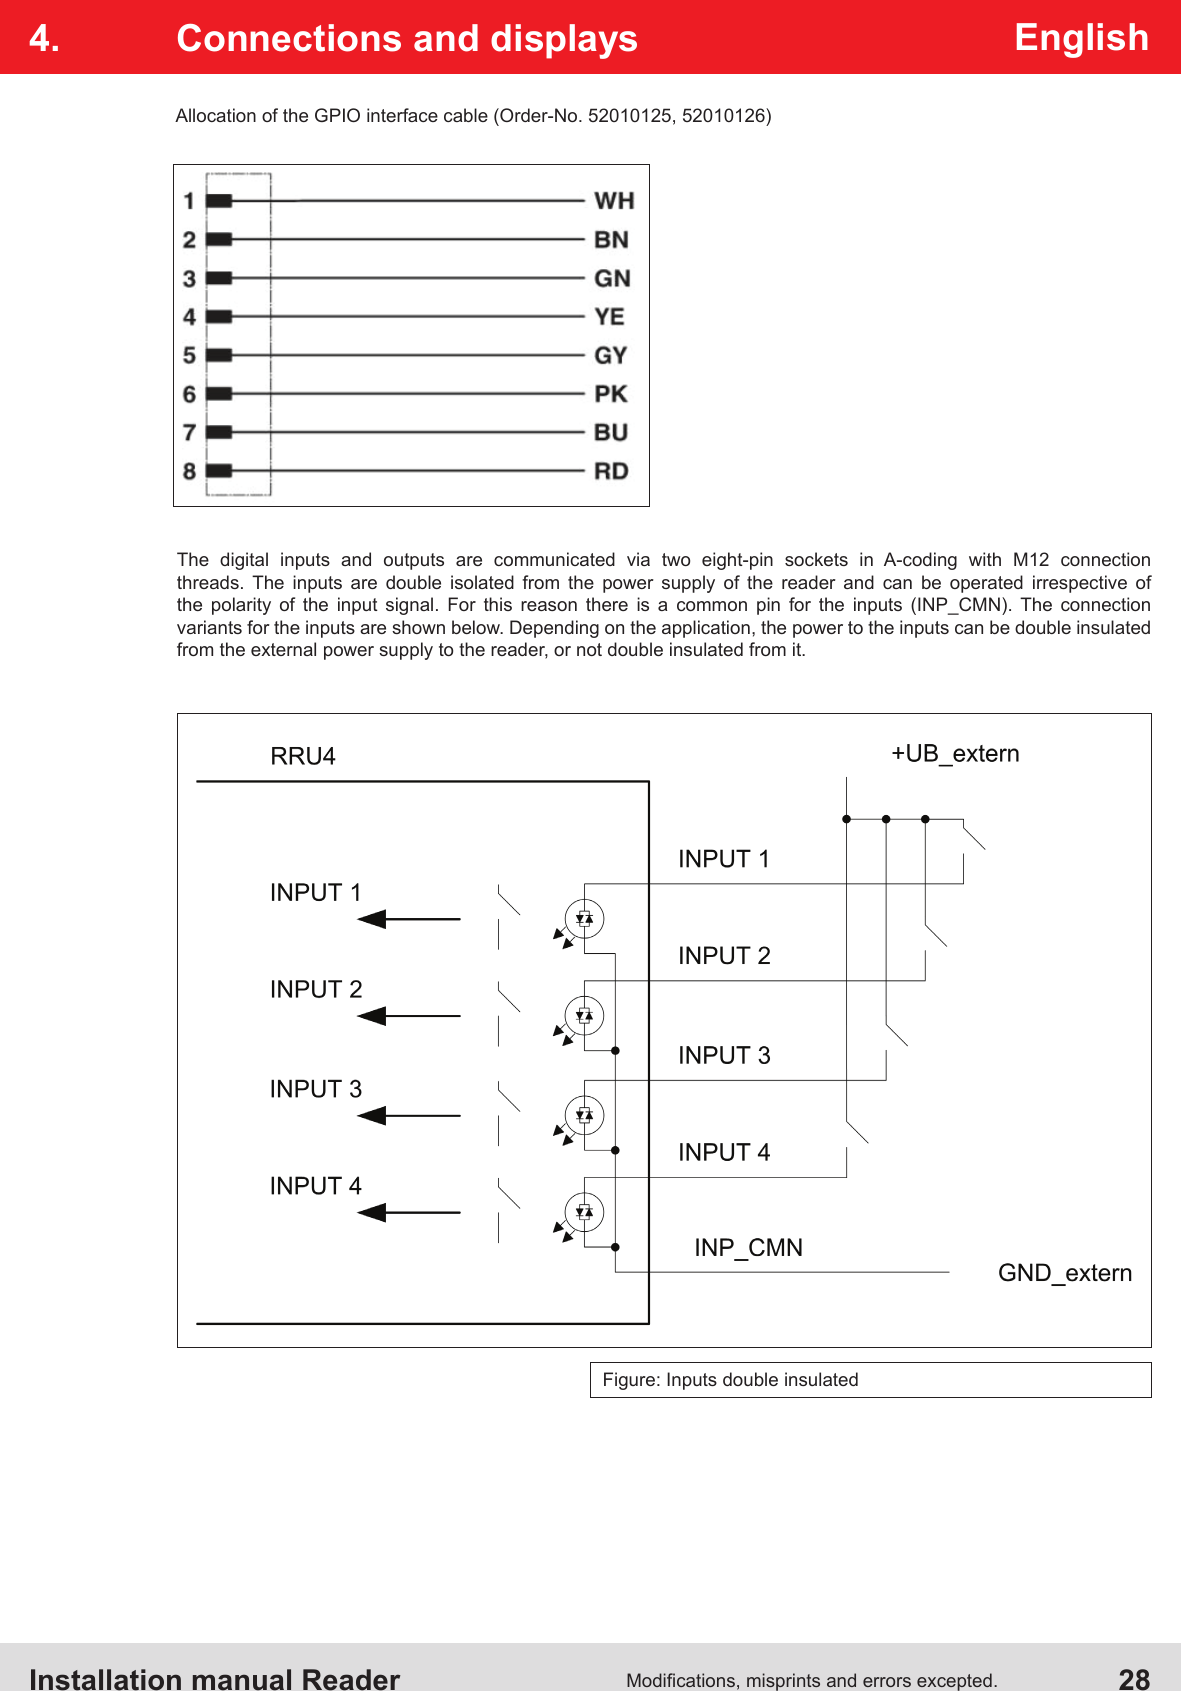 Installation manual Reader  28Modications, misprints and errors excepted.English4.  Connections and displaysAllocation of the GPIO interface cable (Order-No. 52010125, 52010126)The digital inputs and outputs are communicated via two eight-pin sockets in A-coding with M12 connection threads. The inputs are double isolated from the power supply of the reader and can be operated irrespective of the polarity of the input signal. For this reason there is a common pin for the inputs (INP_CMN). The connection variants for the inputs are shown below. Depending on the application, the power to the inputs can be double insulated  from the external power supply to the reader, or not double insulated from it.Figure: Inputs double insulated